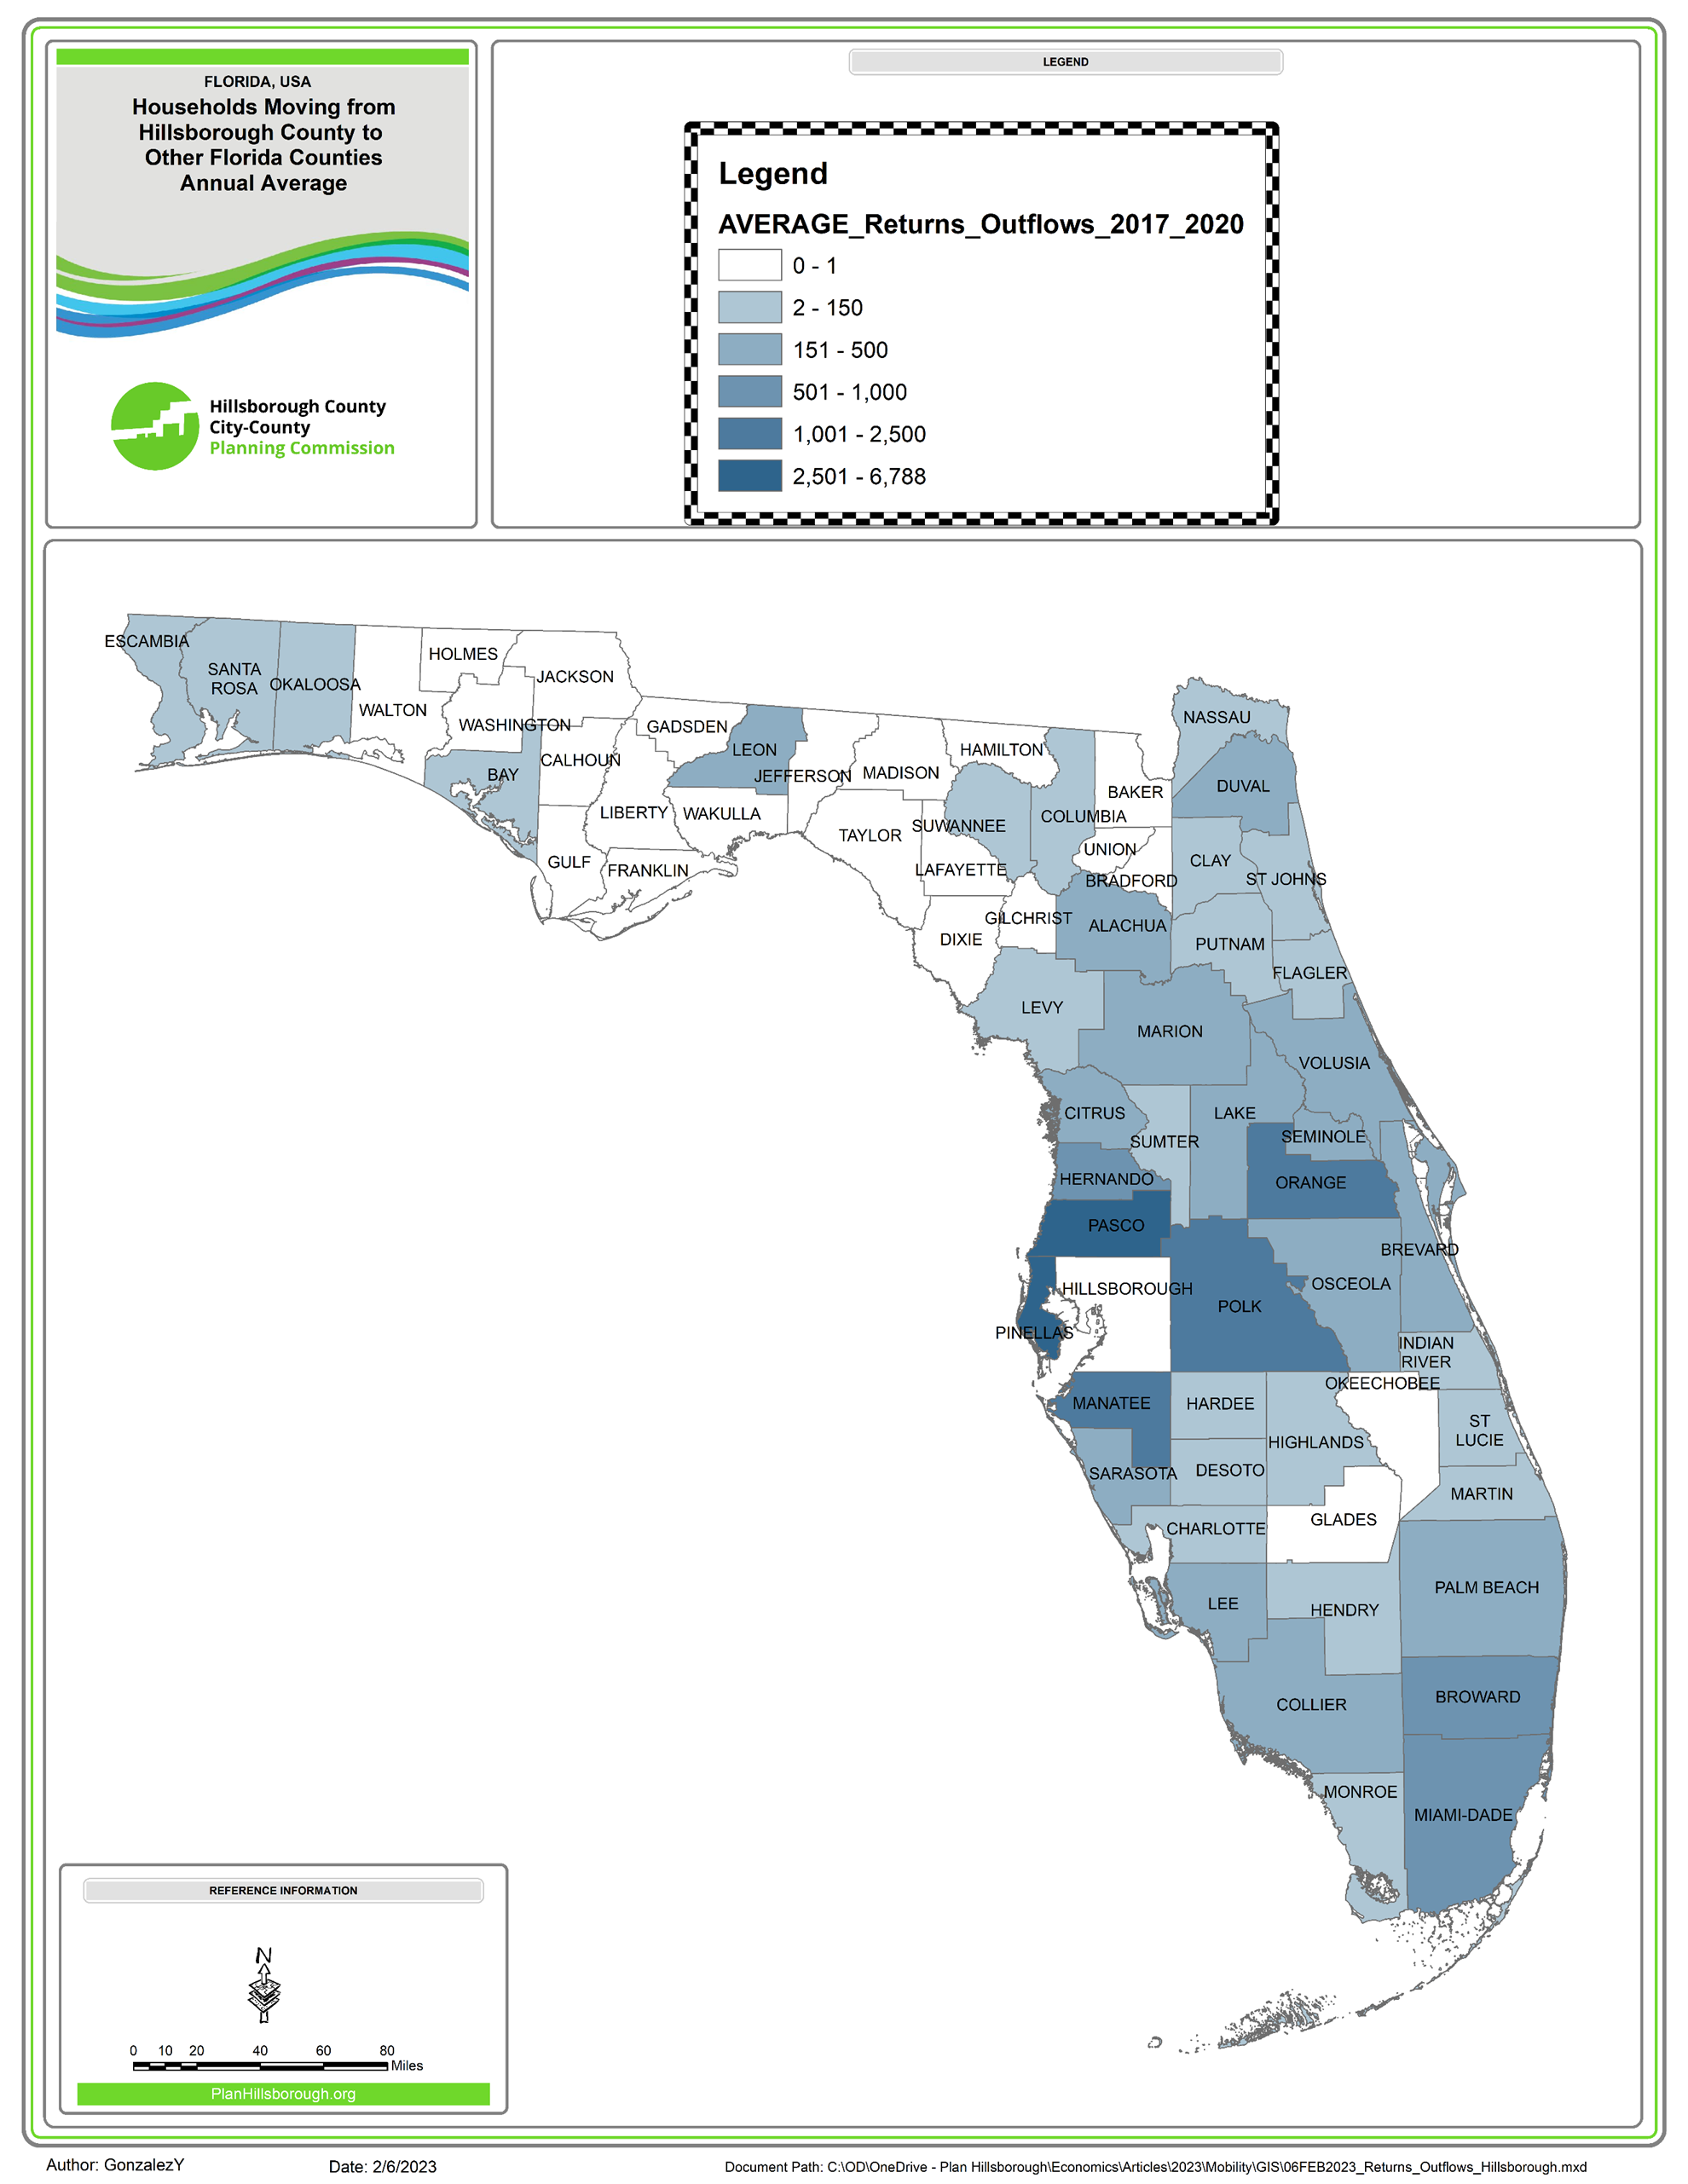 Map shows destination Florida Counties for former Hillsborough County residents.  Manatee, Orange, Pasco, Pinellas, and Polk receive over 1,000 new households from Hillsborough County yearly.